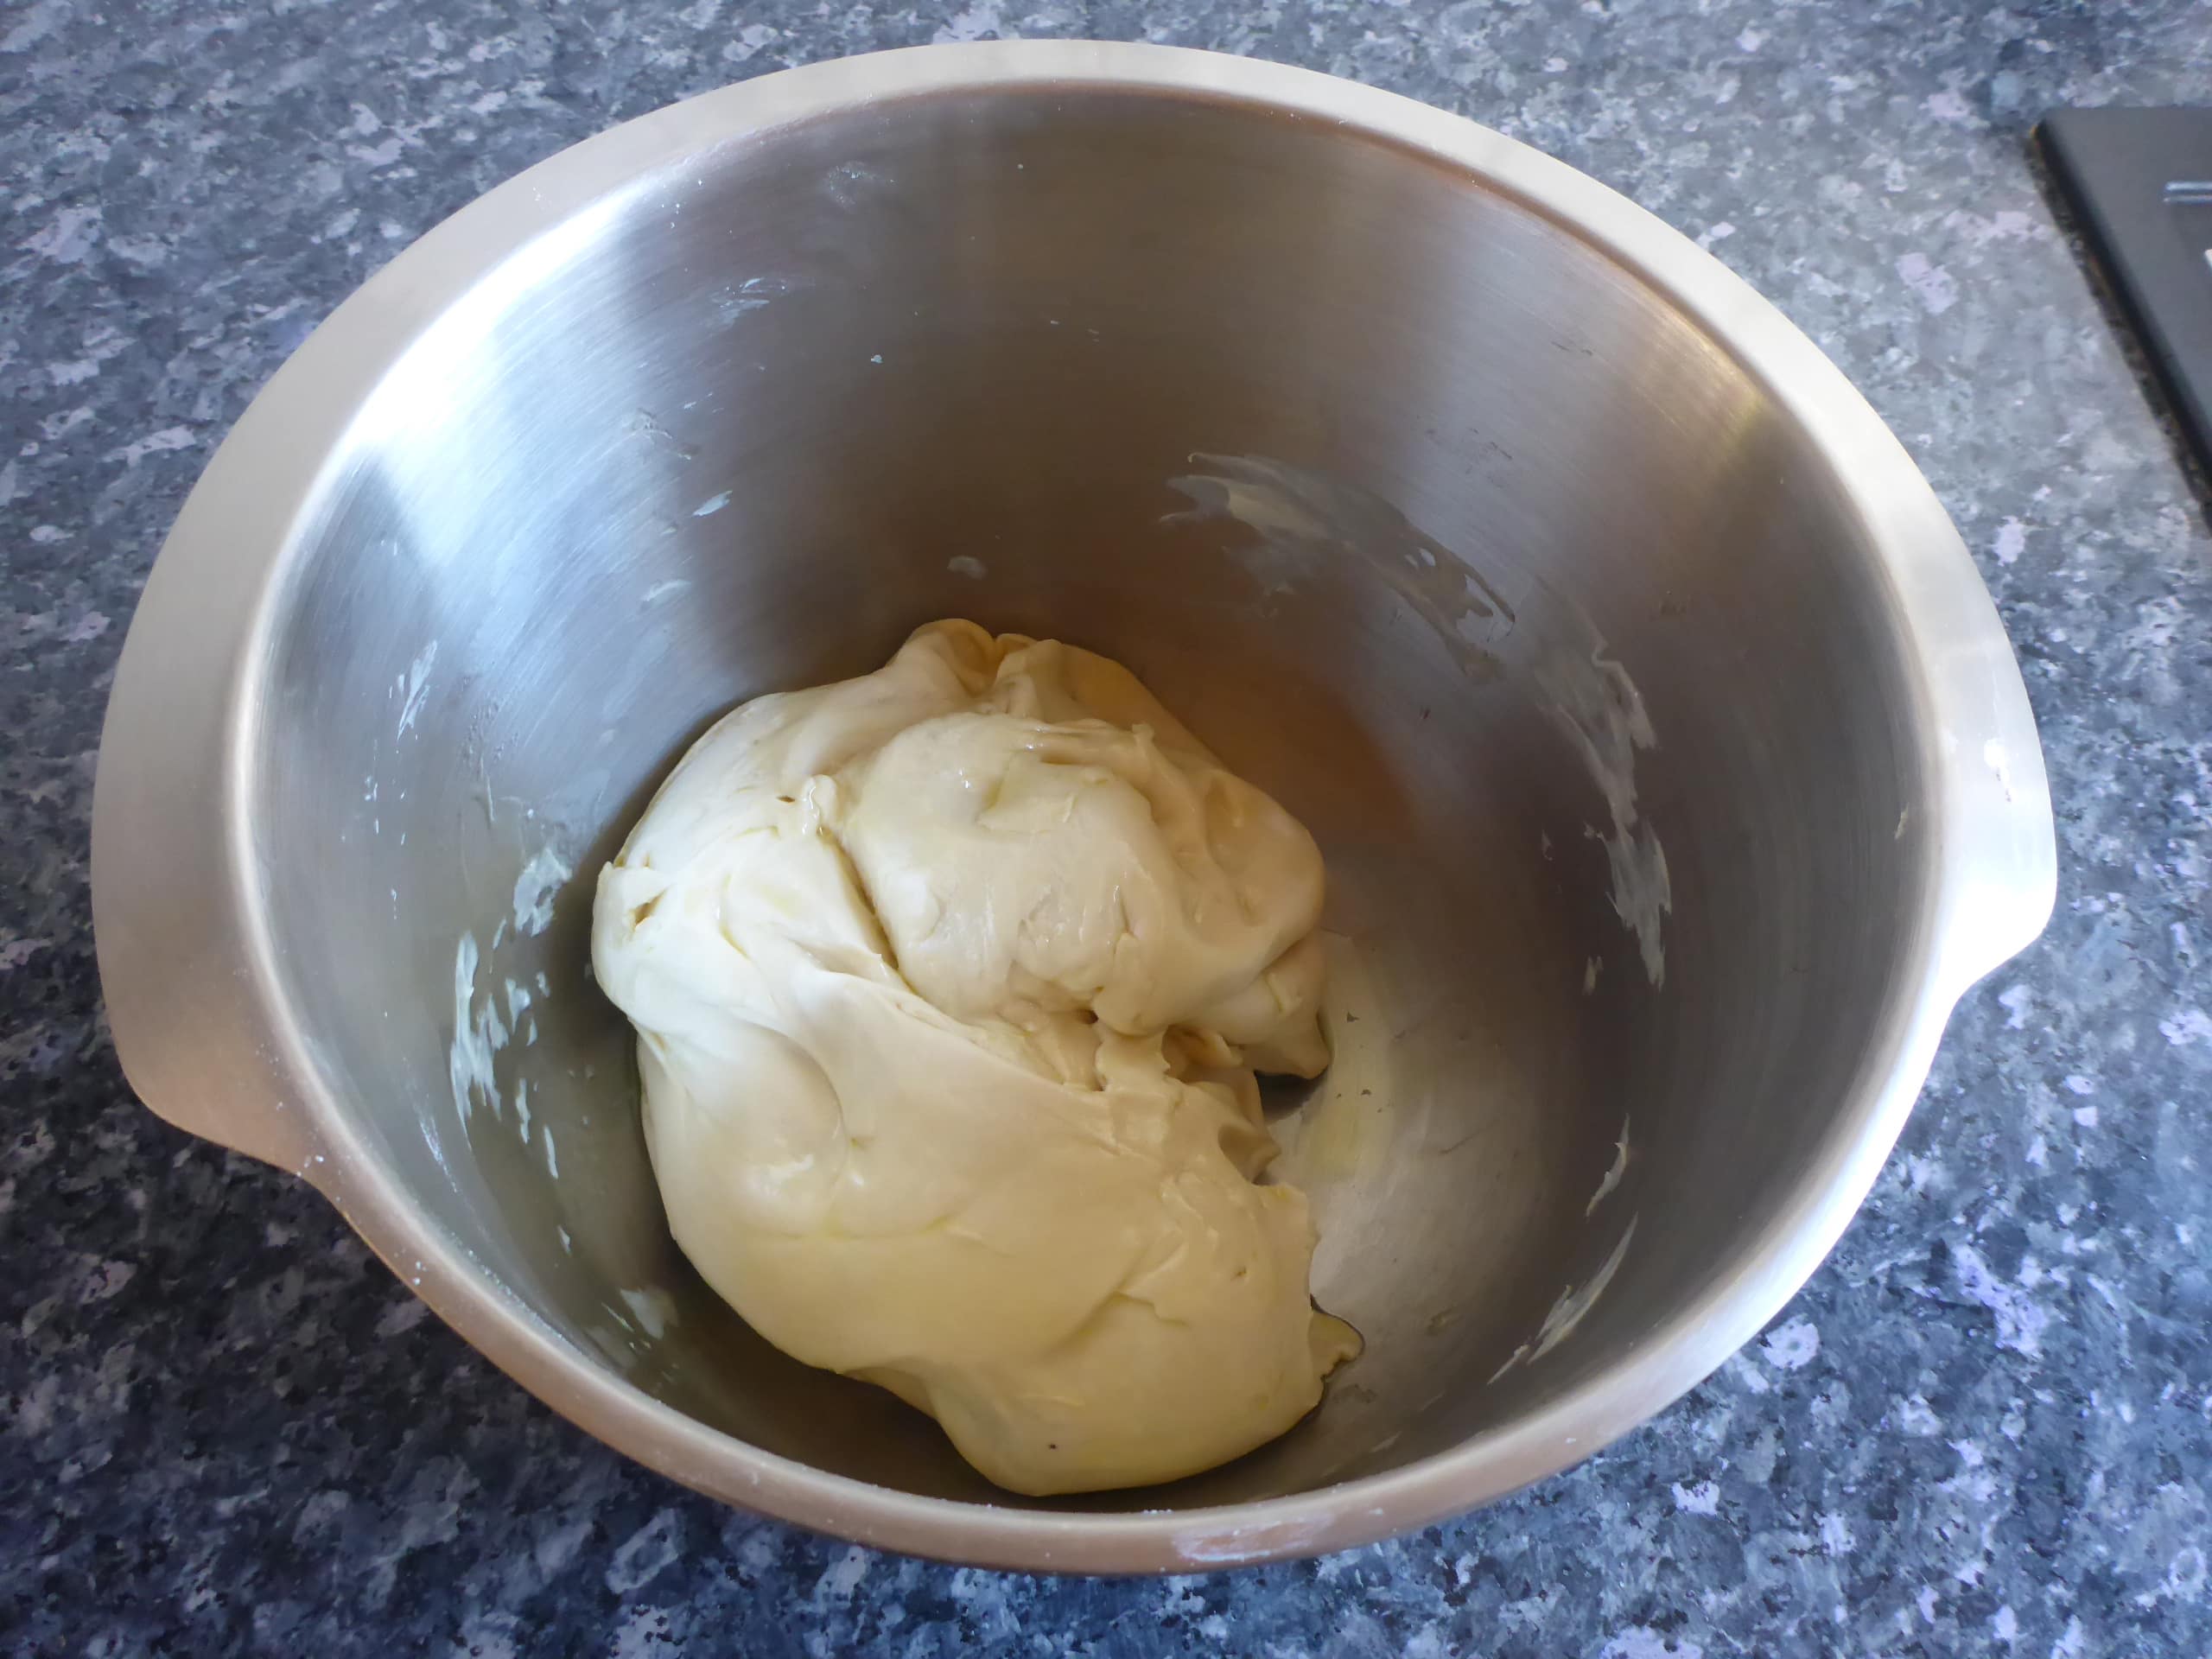 Yeast dough before the first rise.